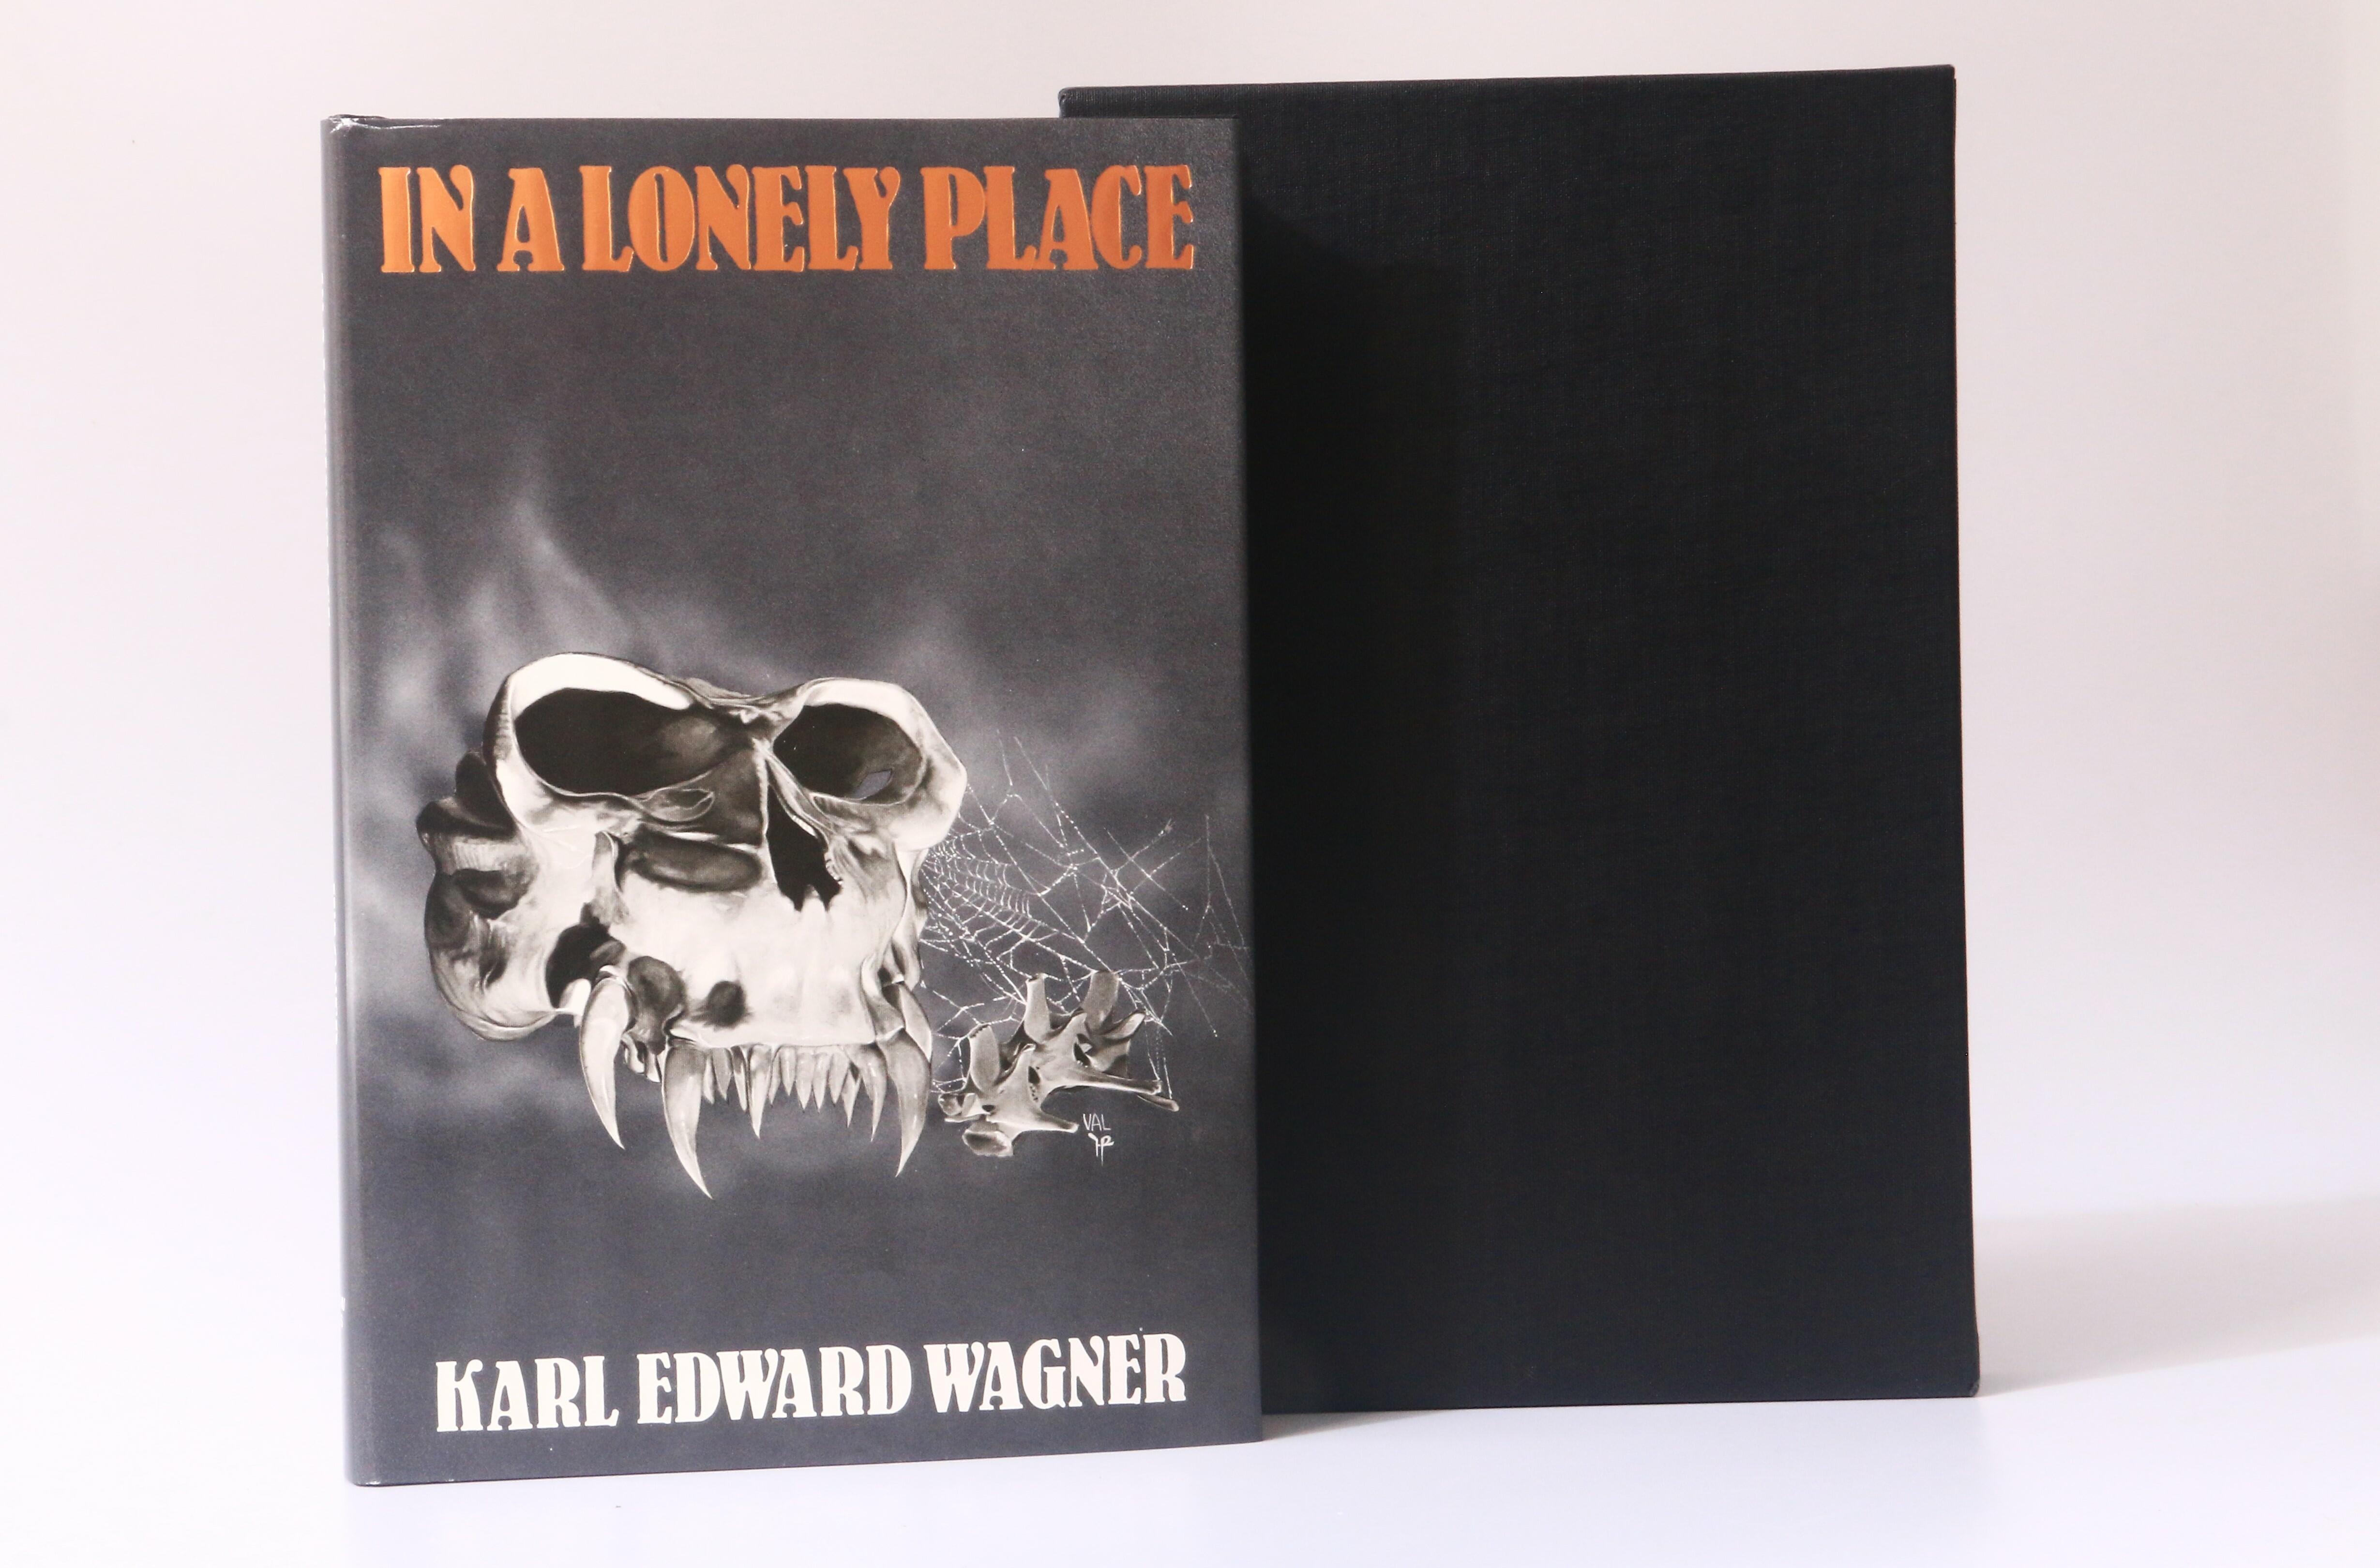 Karl Edward Wagner - In a Lonely Place - Scream Press, 1984, Signed Limited Edition.